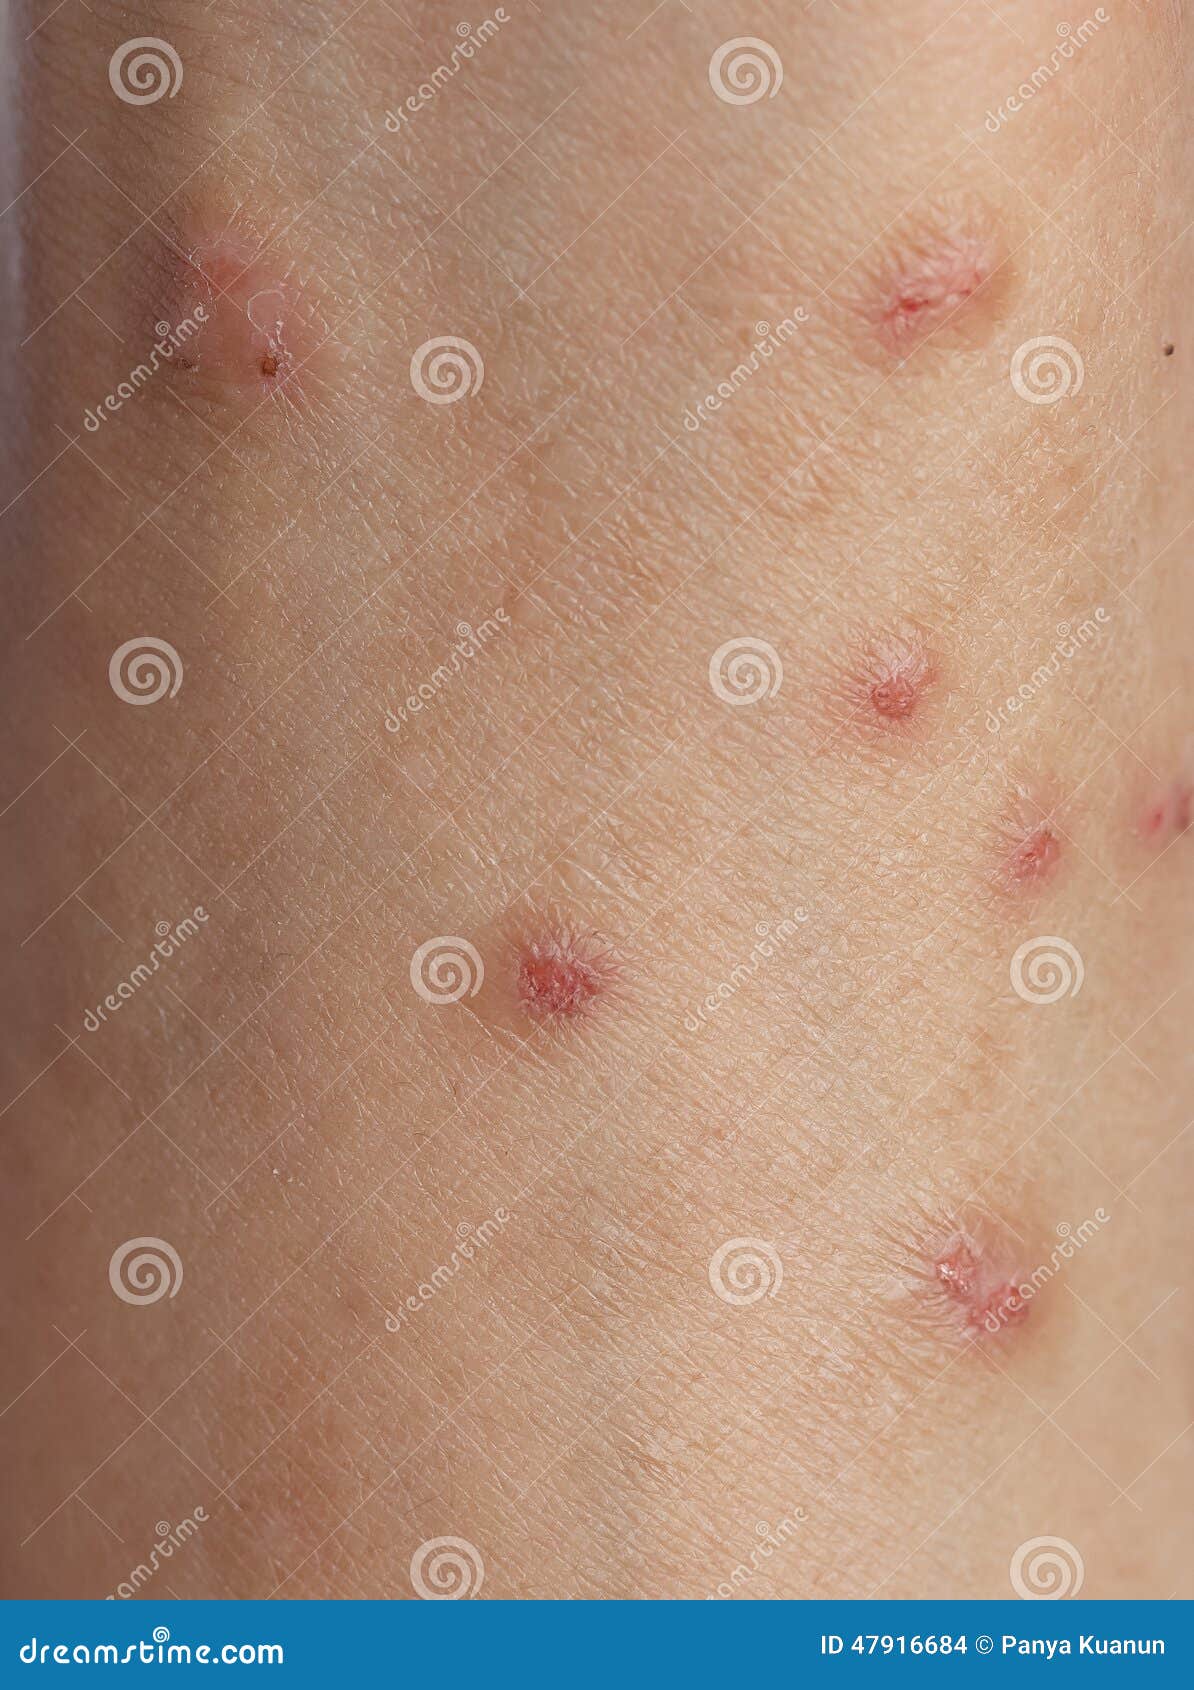 Skin Cancer Lesions On Arms